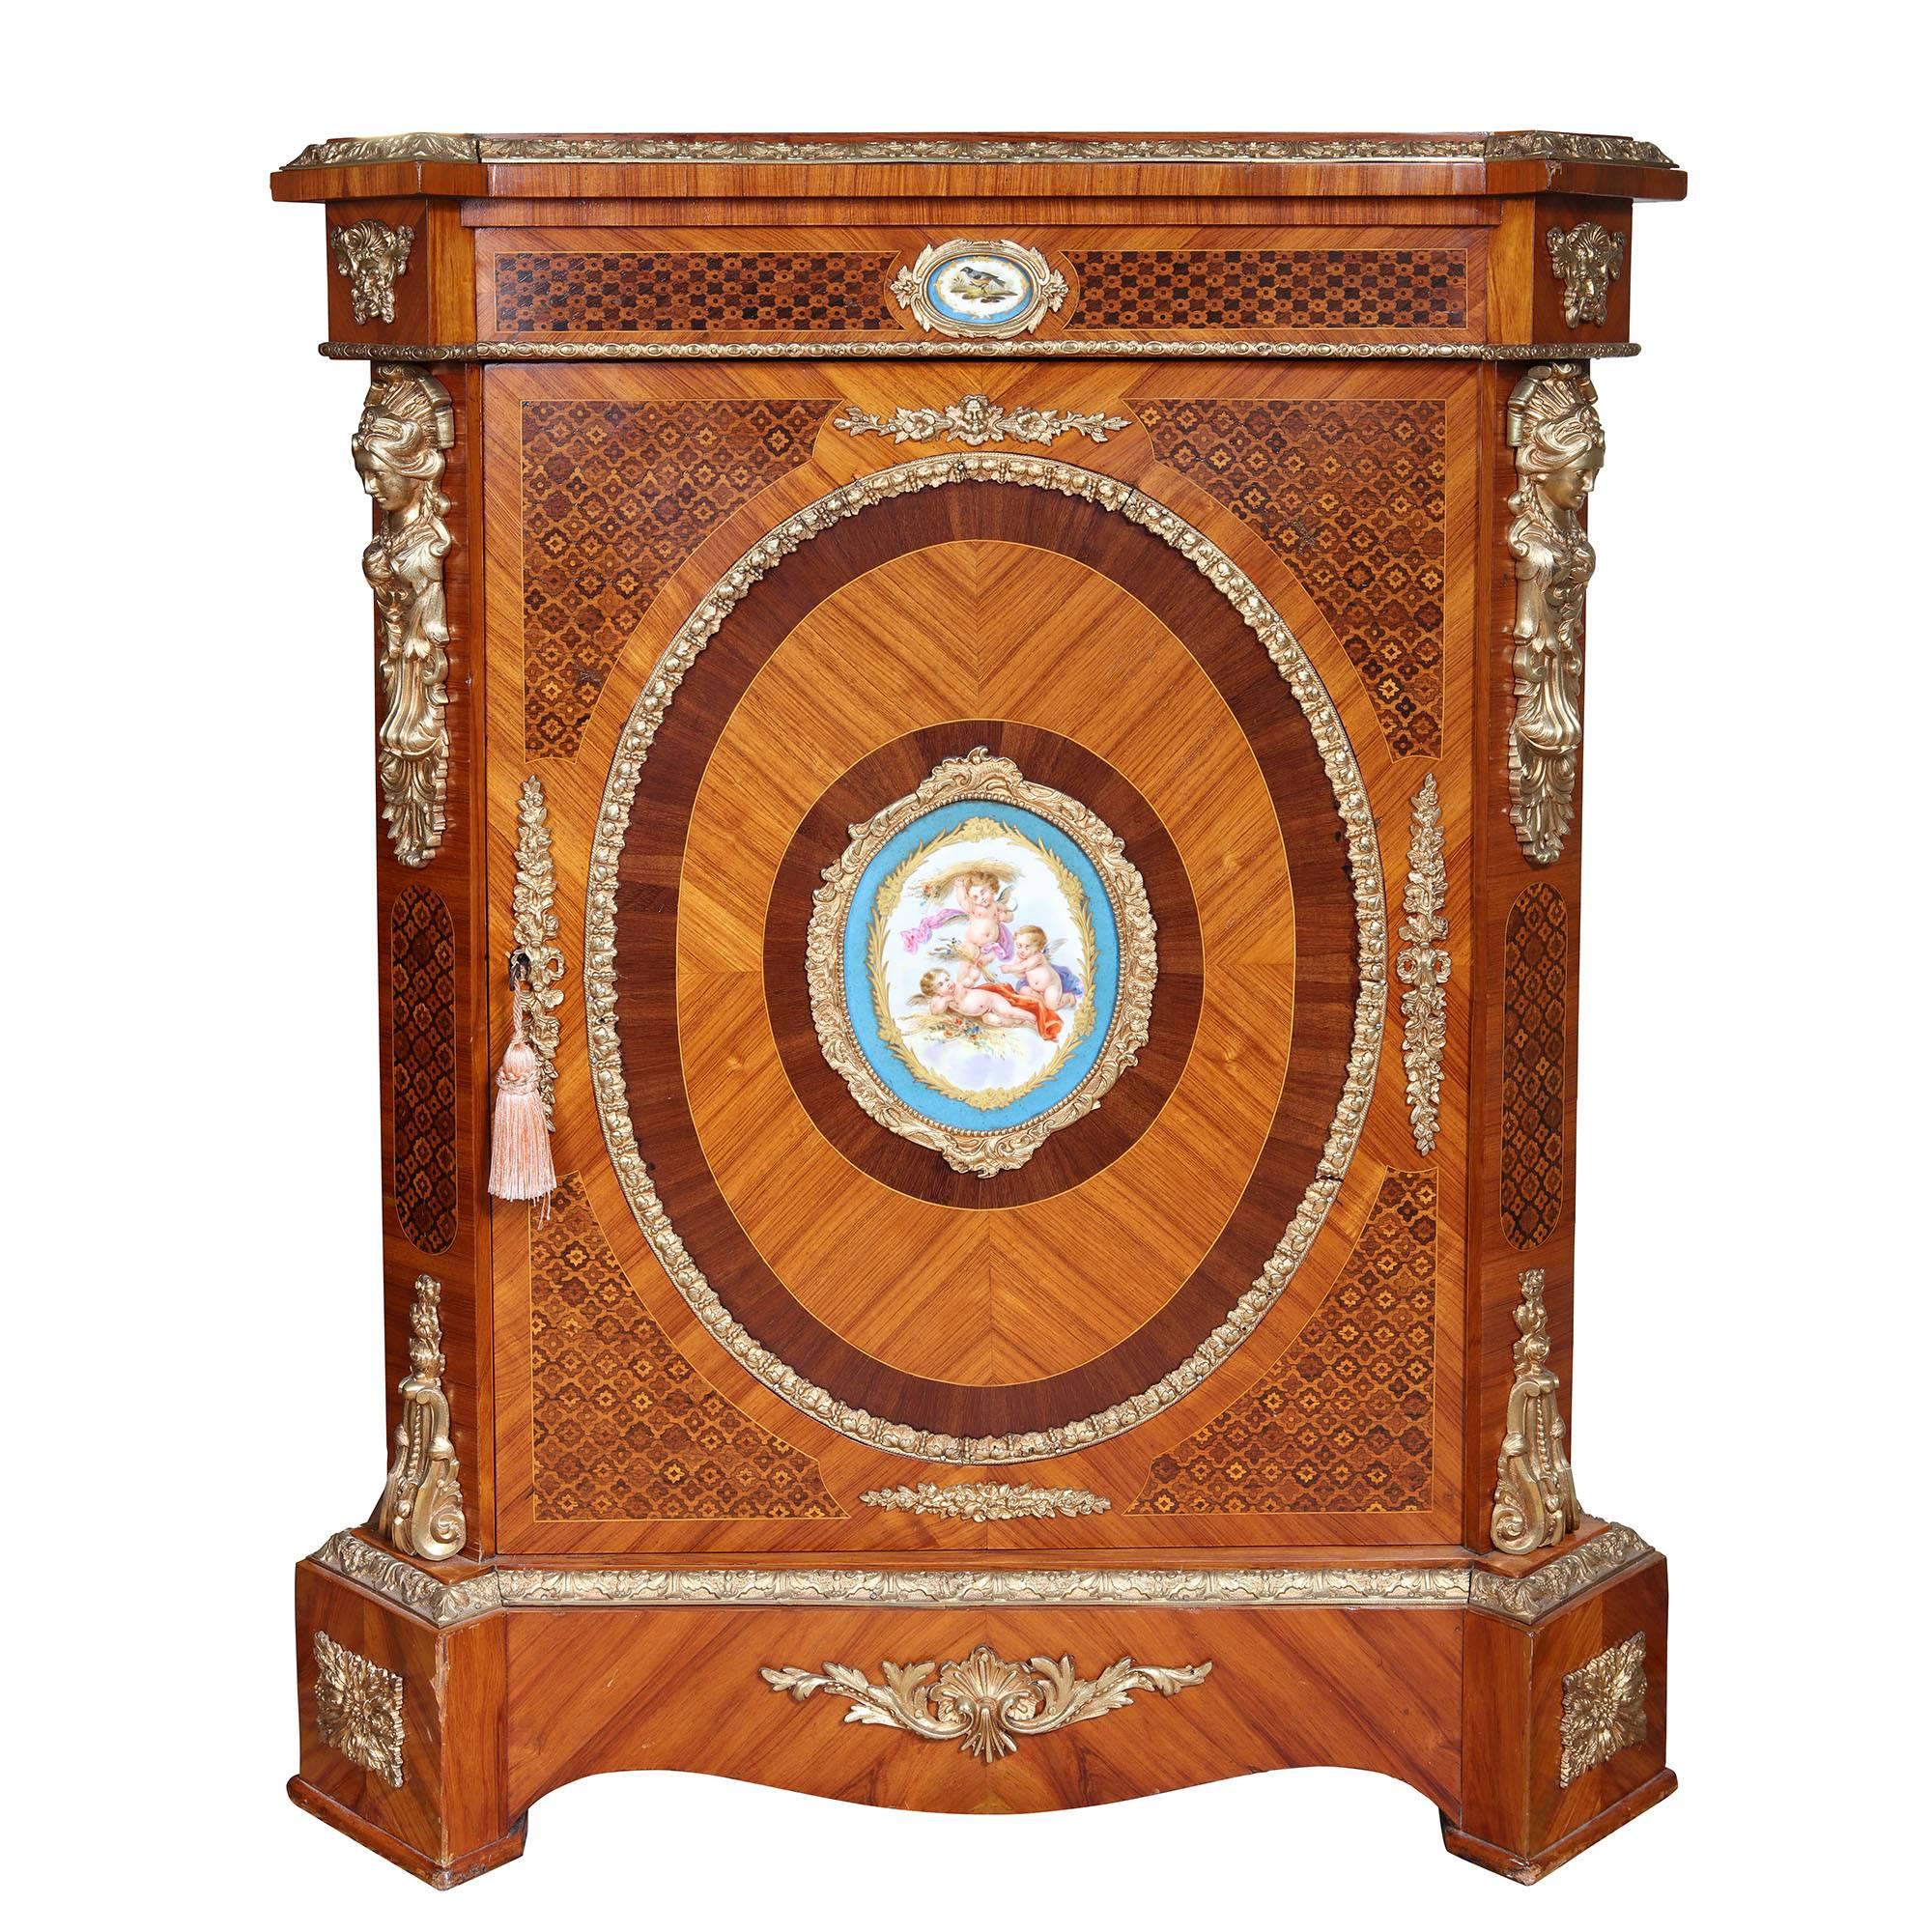 A fine 19th century Napoleon III side cabinet with inlaid marquetry panels, book matched sides with gilt bronze mounts of classical figures and foliage. The top drawer and central panel with sevres porcelain panels with marquetry borders. Opening to